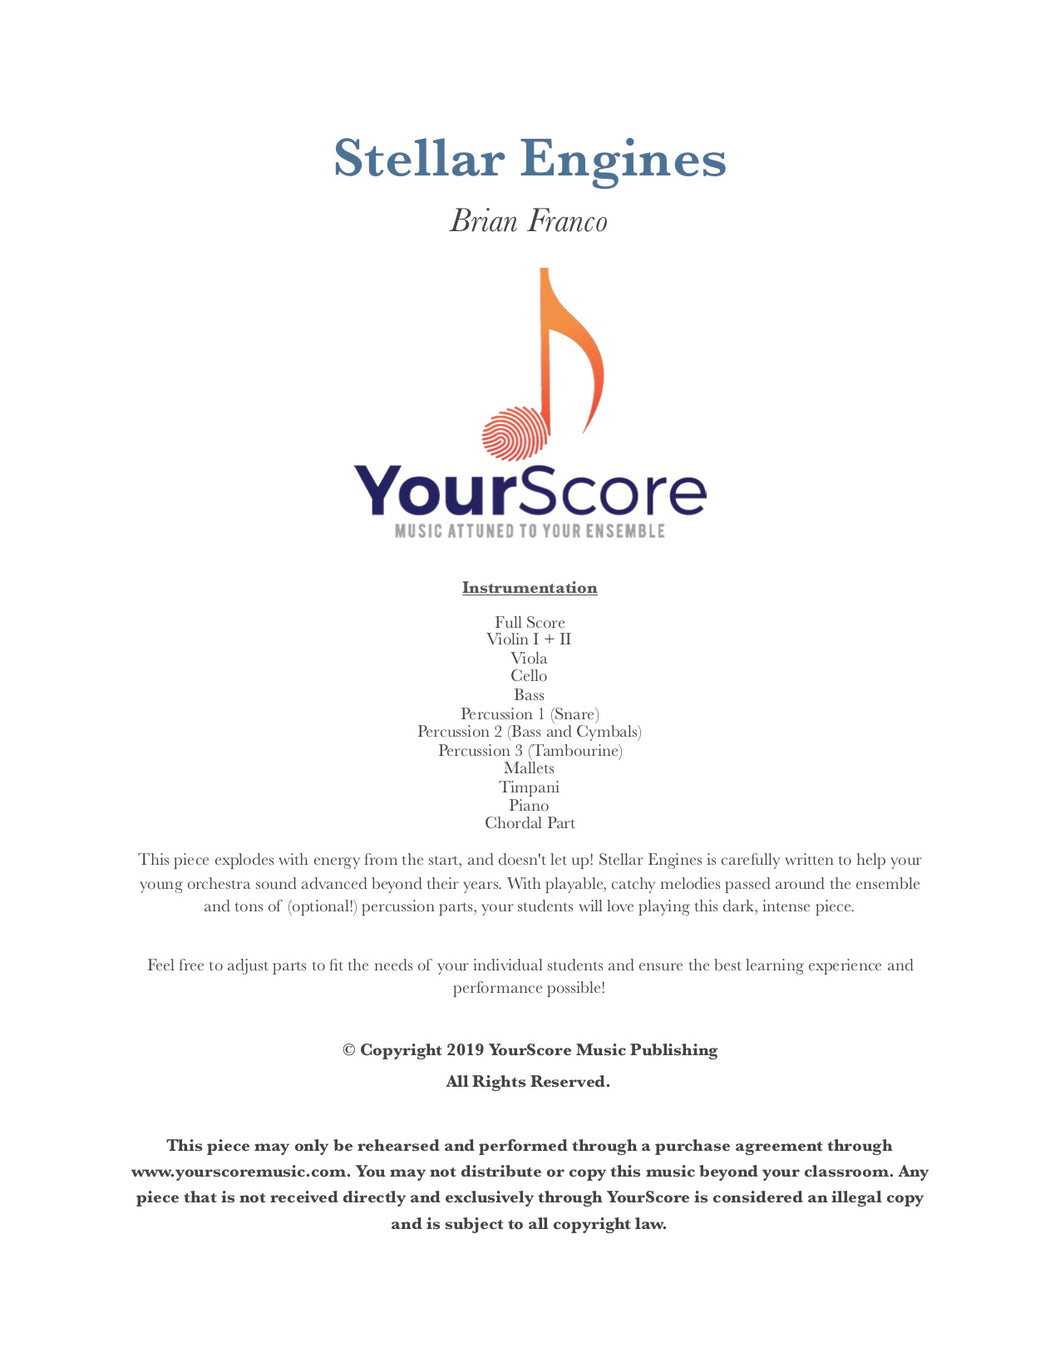 cover of Stellar Engines, an adaptable piece of middle school orchestra music written by Brian Franco